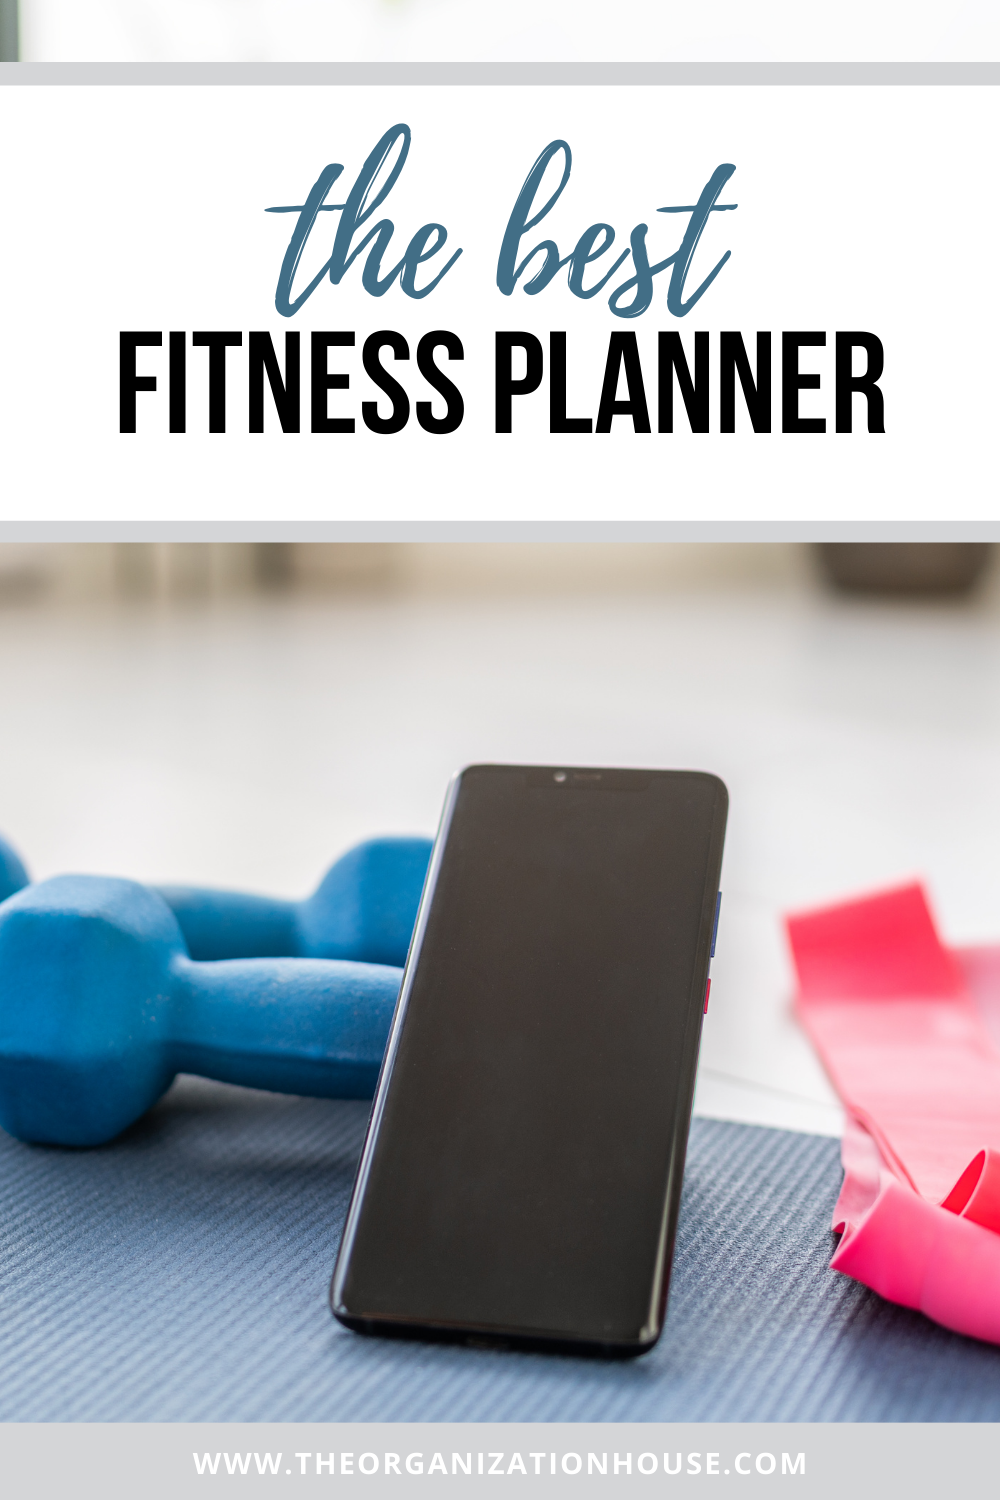 The Best Fitness Planner